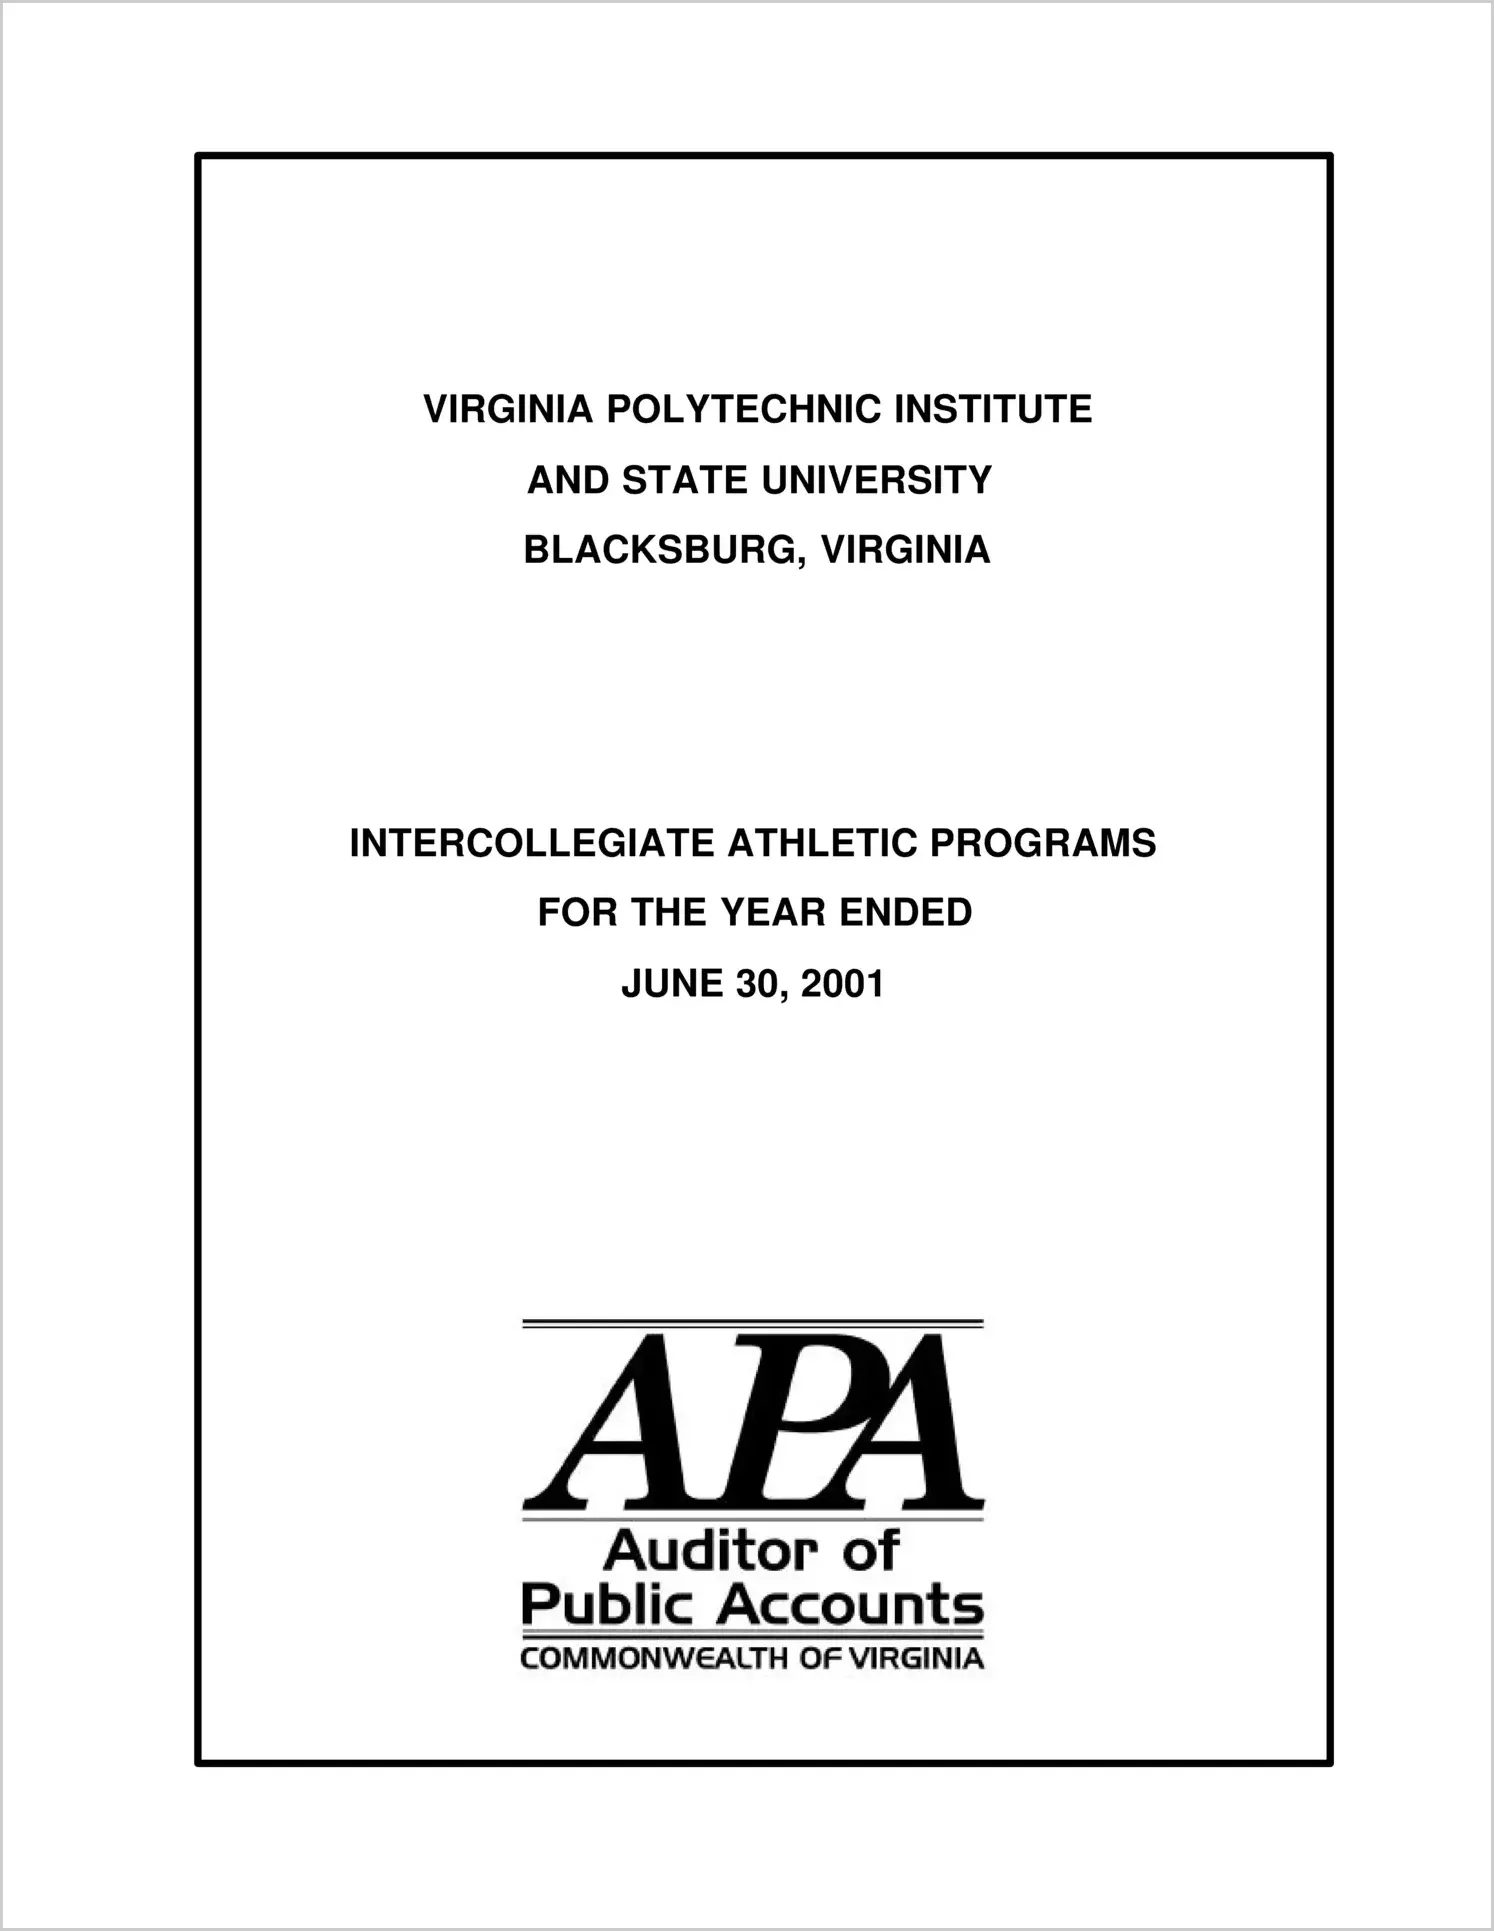 Virginia Polytechnic Institute and State University Intercollegiate Athletic Programs for the year ended June 30, 2001